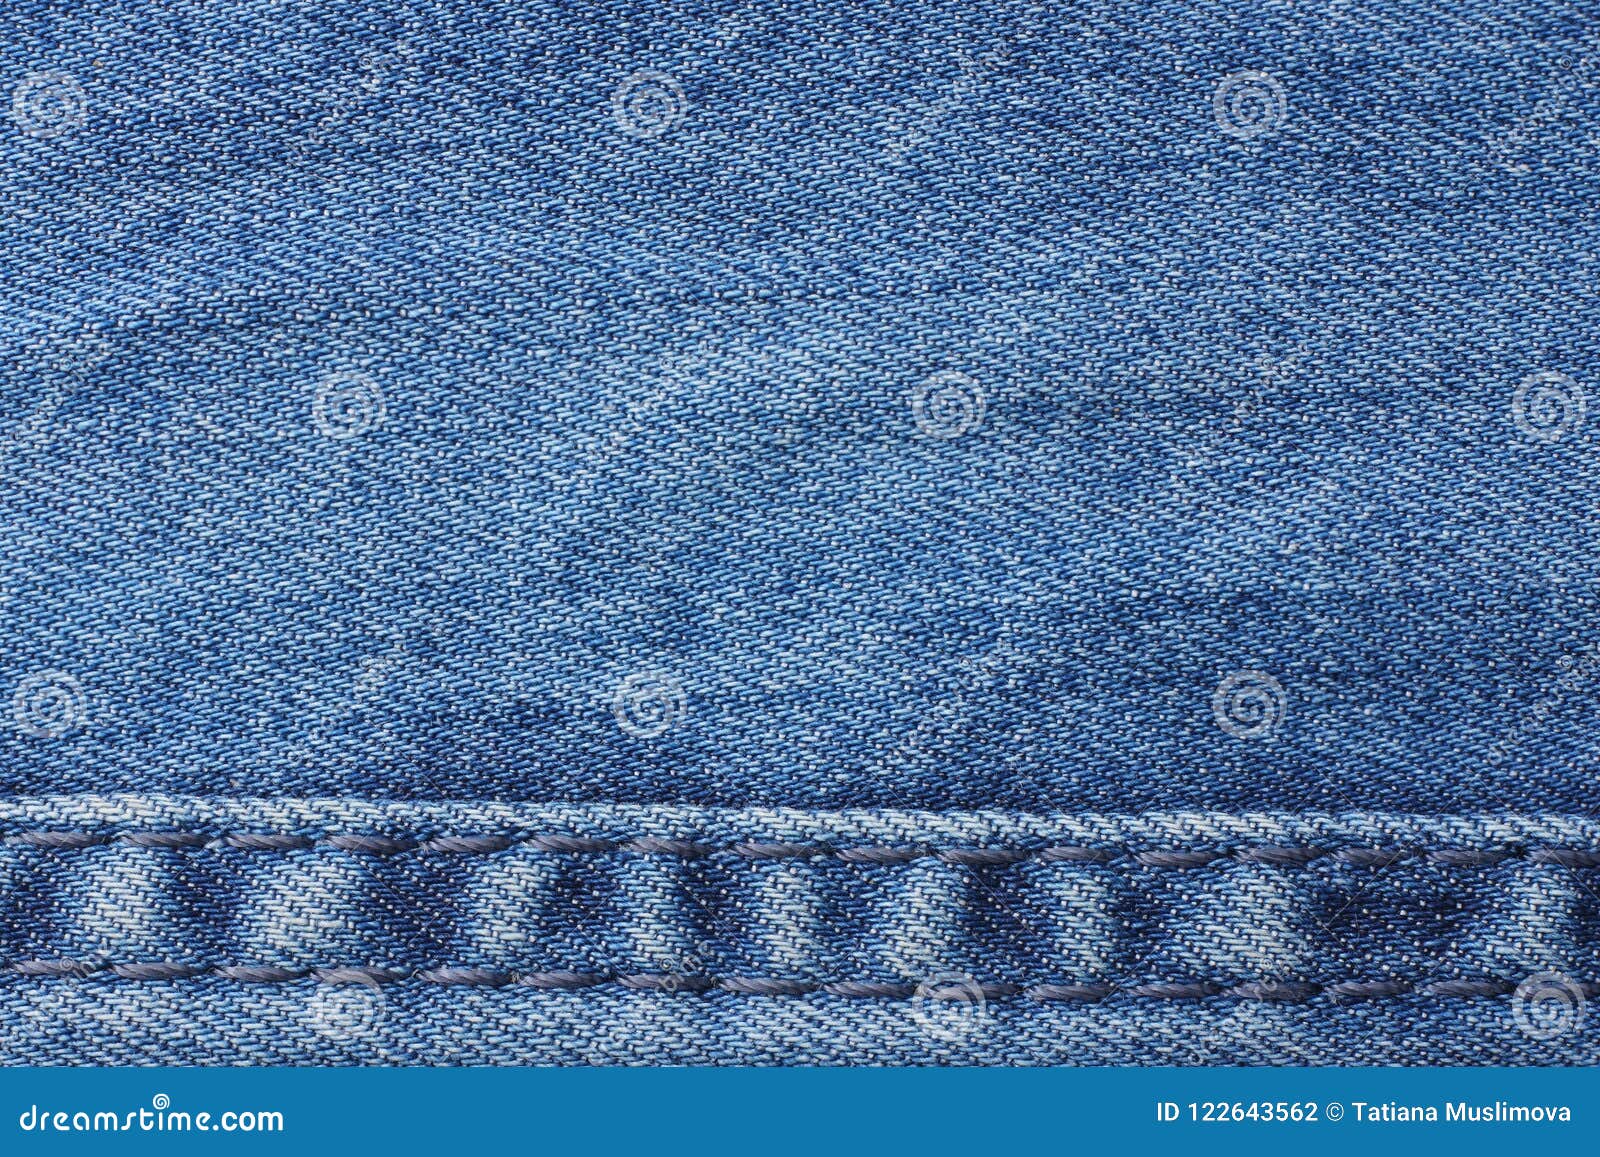 Blue Jeans Background. Jeans Texture Stock Photo - Image of denim ...